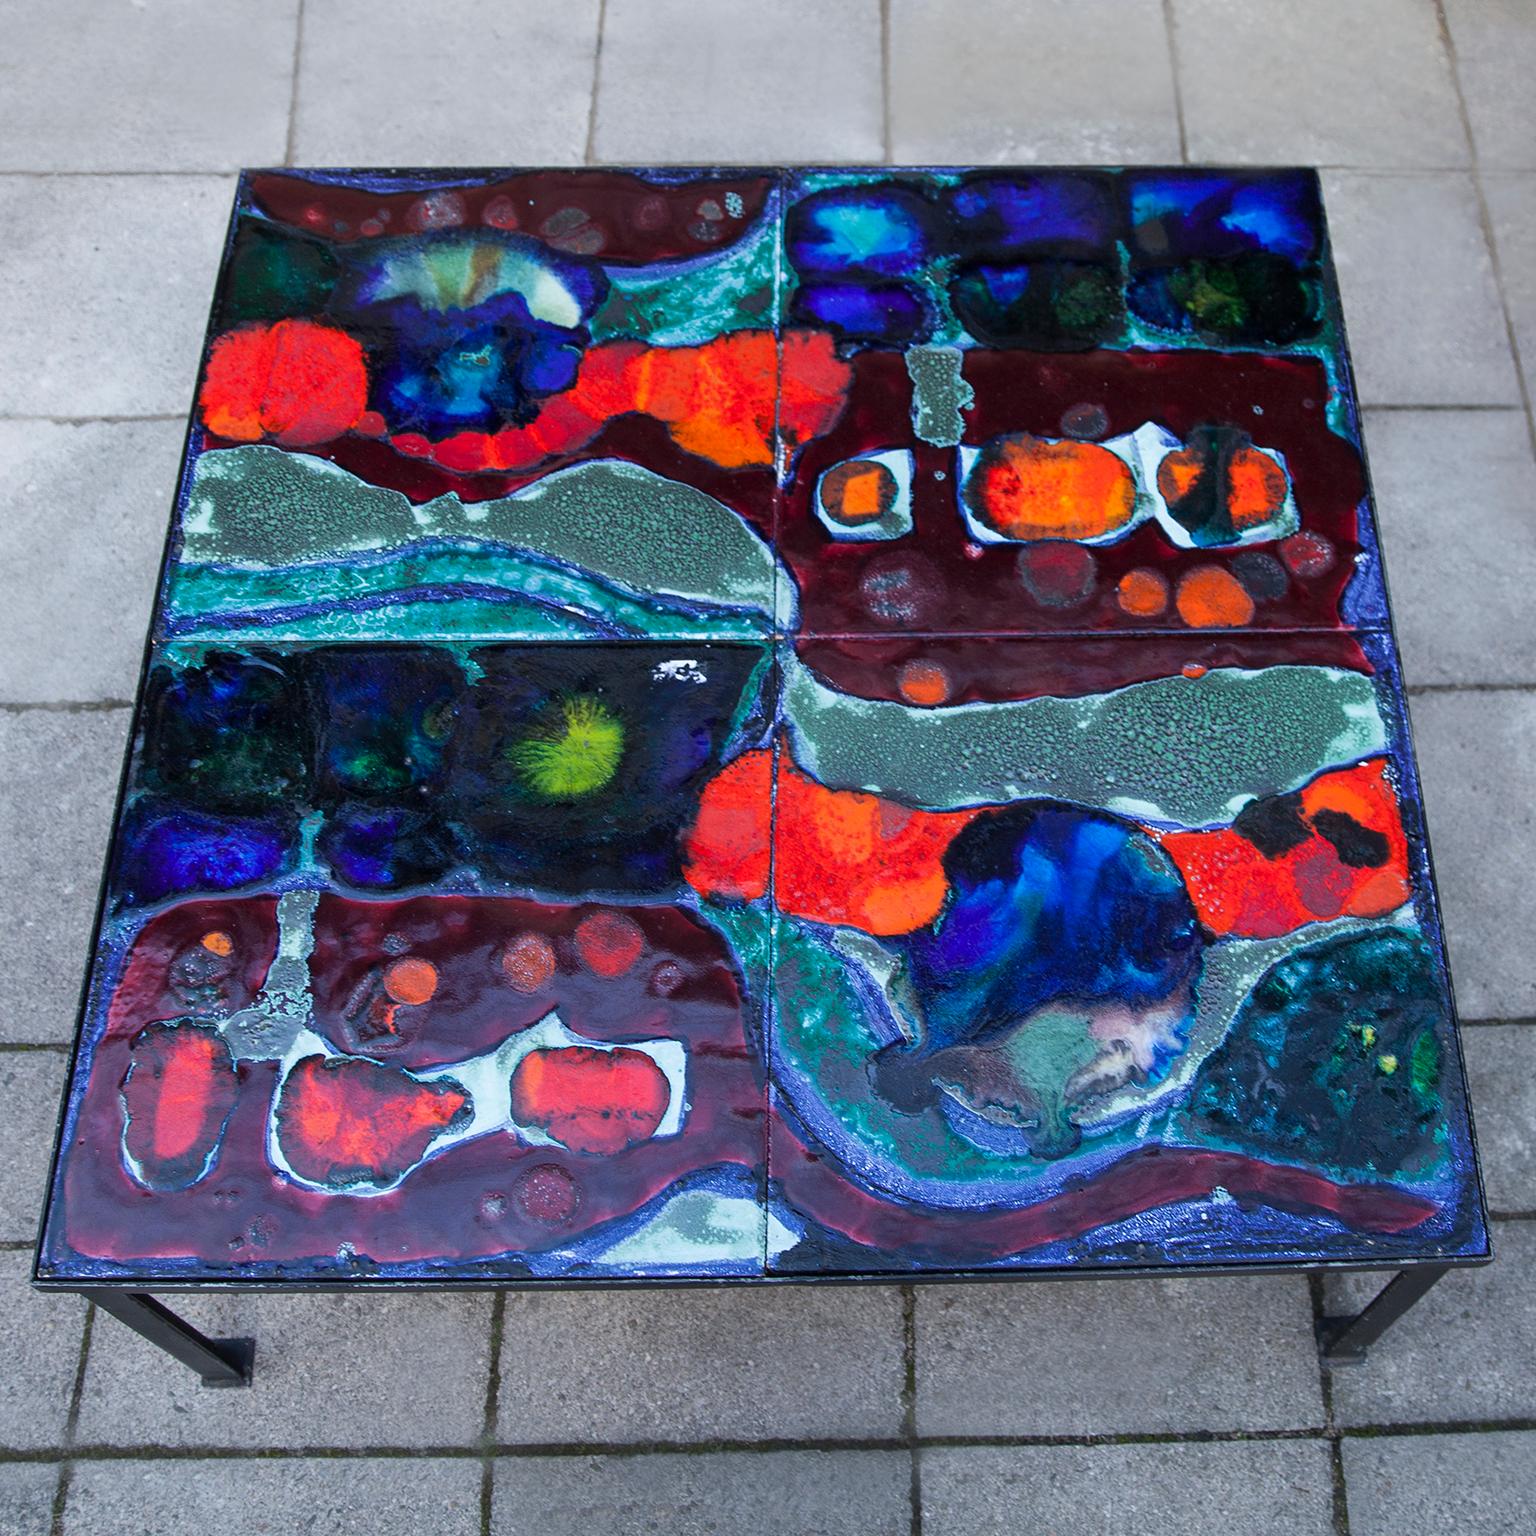 Colorful ceramic coffee table made by Hanns Altmeier, 1906-1979 a German painting artist. Iron black painted base with four ceramic tiles.